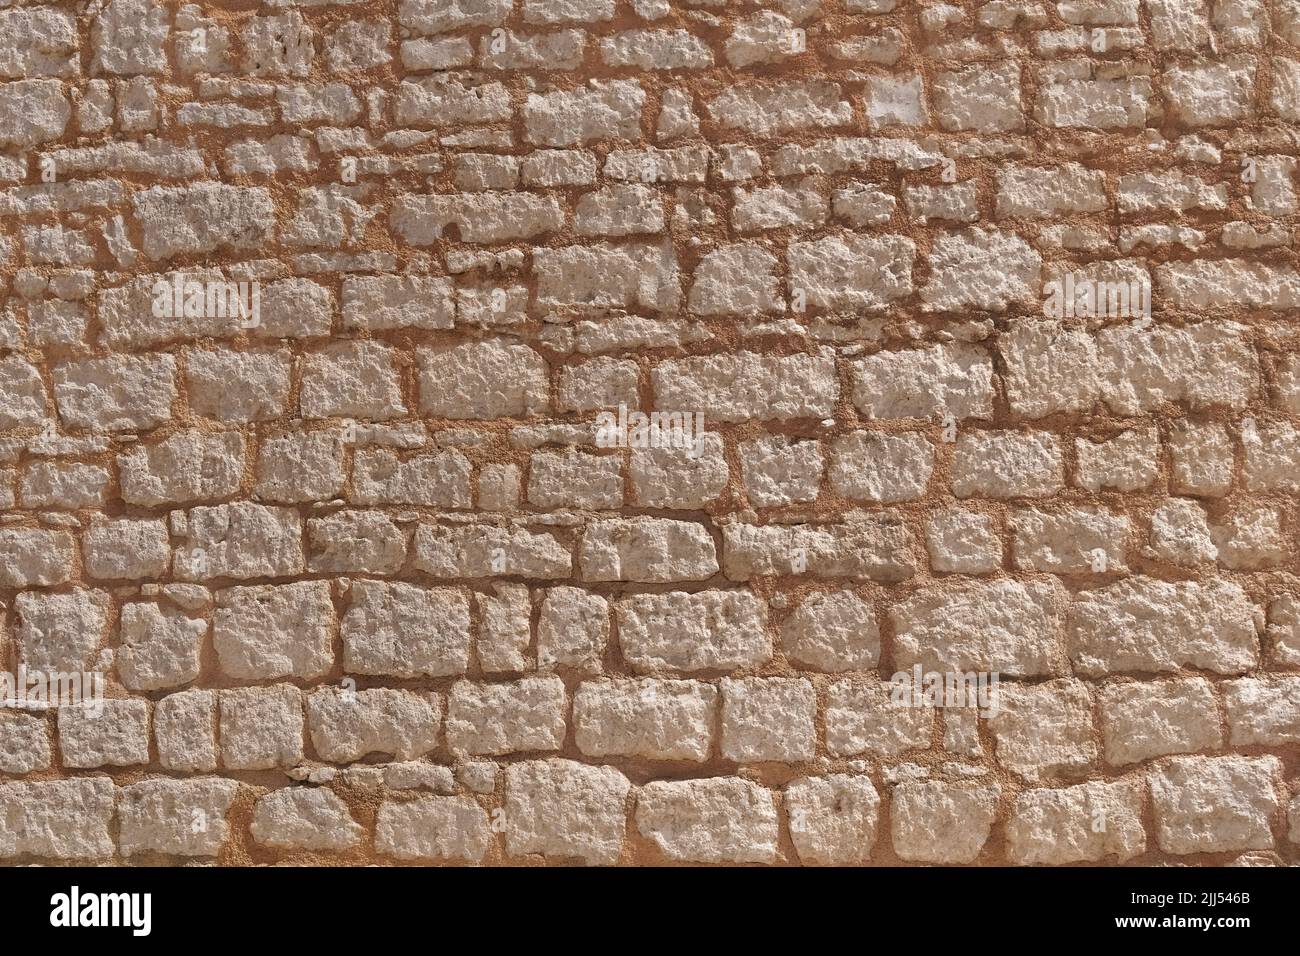 Old natural stone wall in Mediterranean style Stock Photo